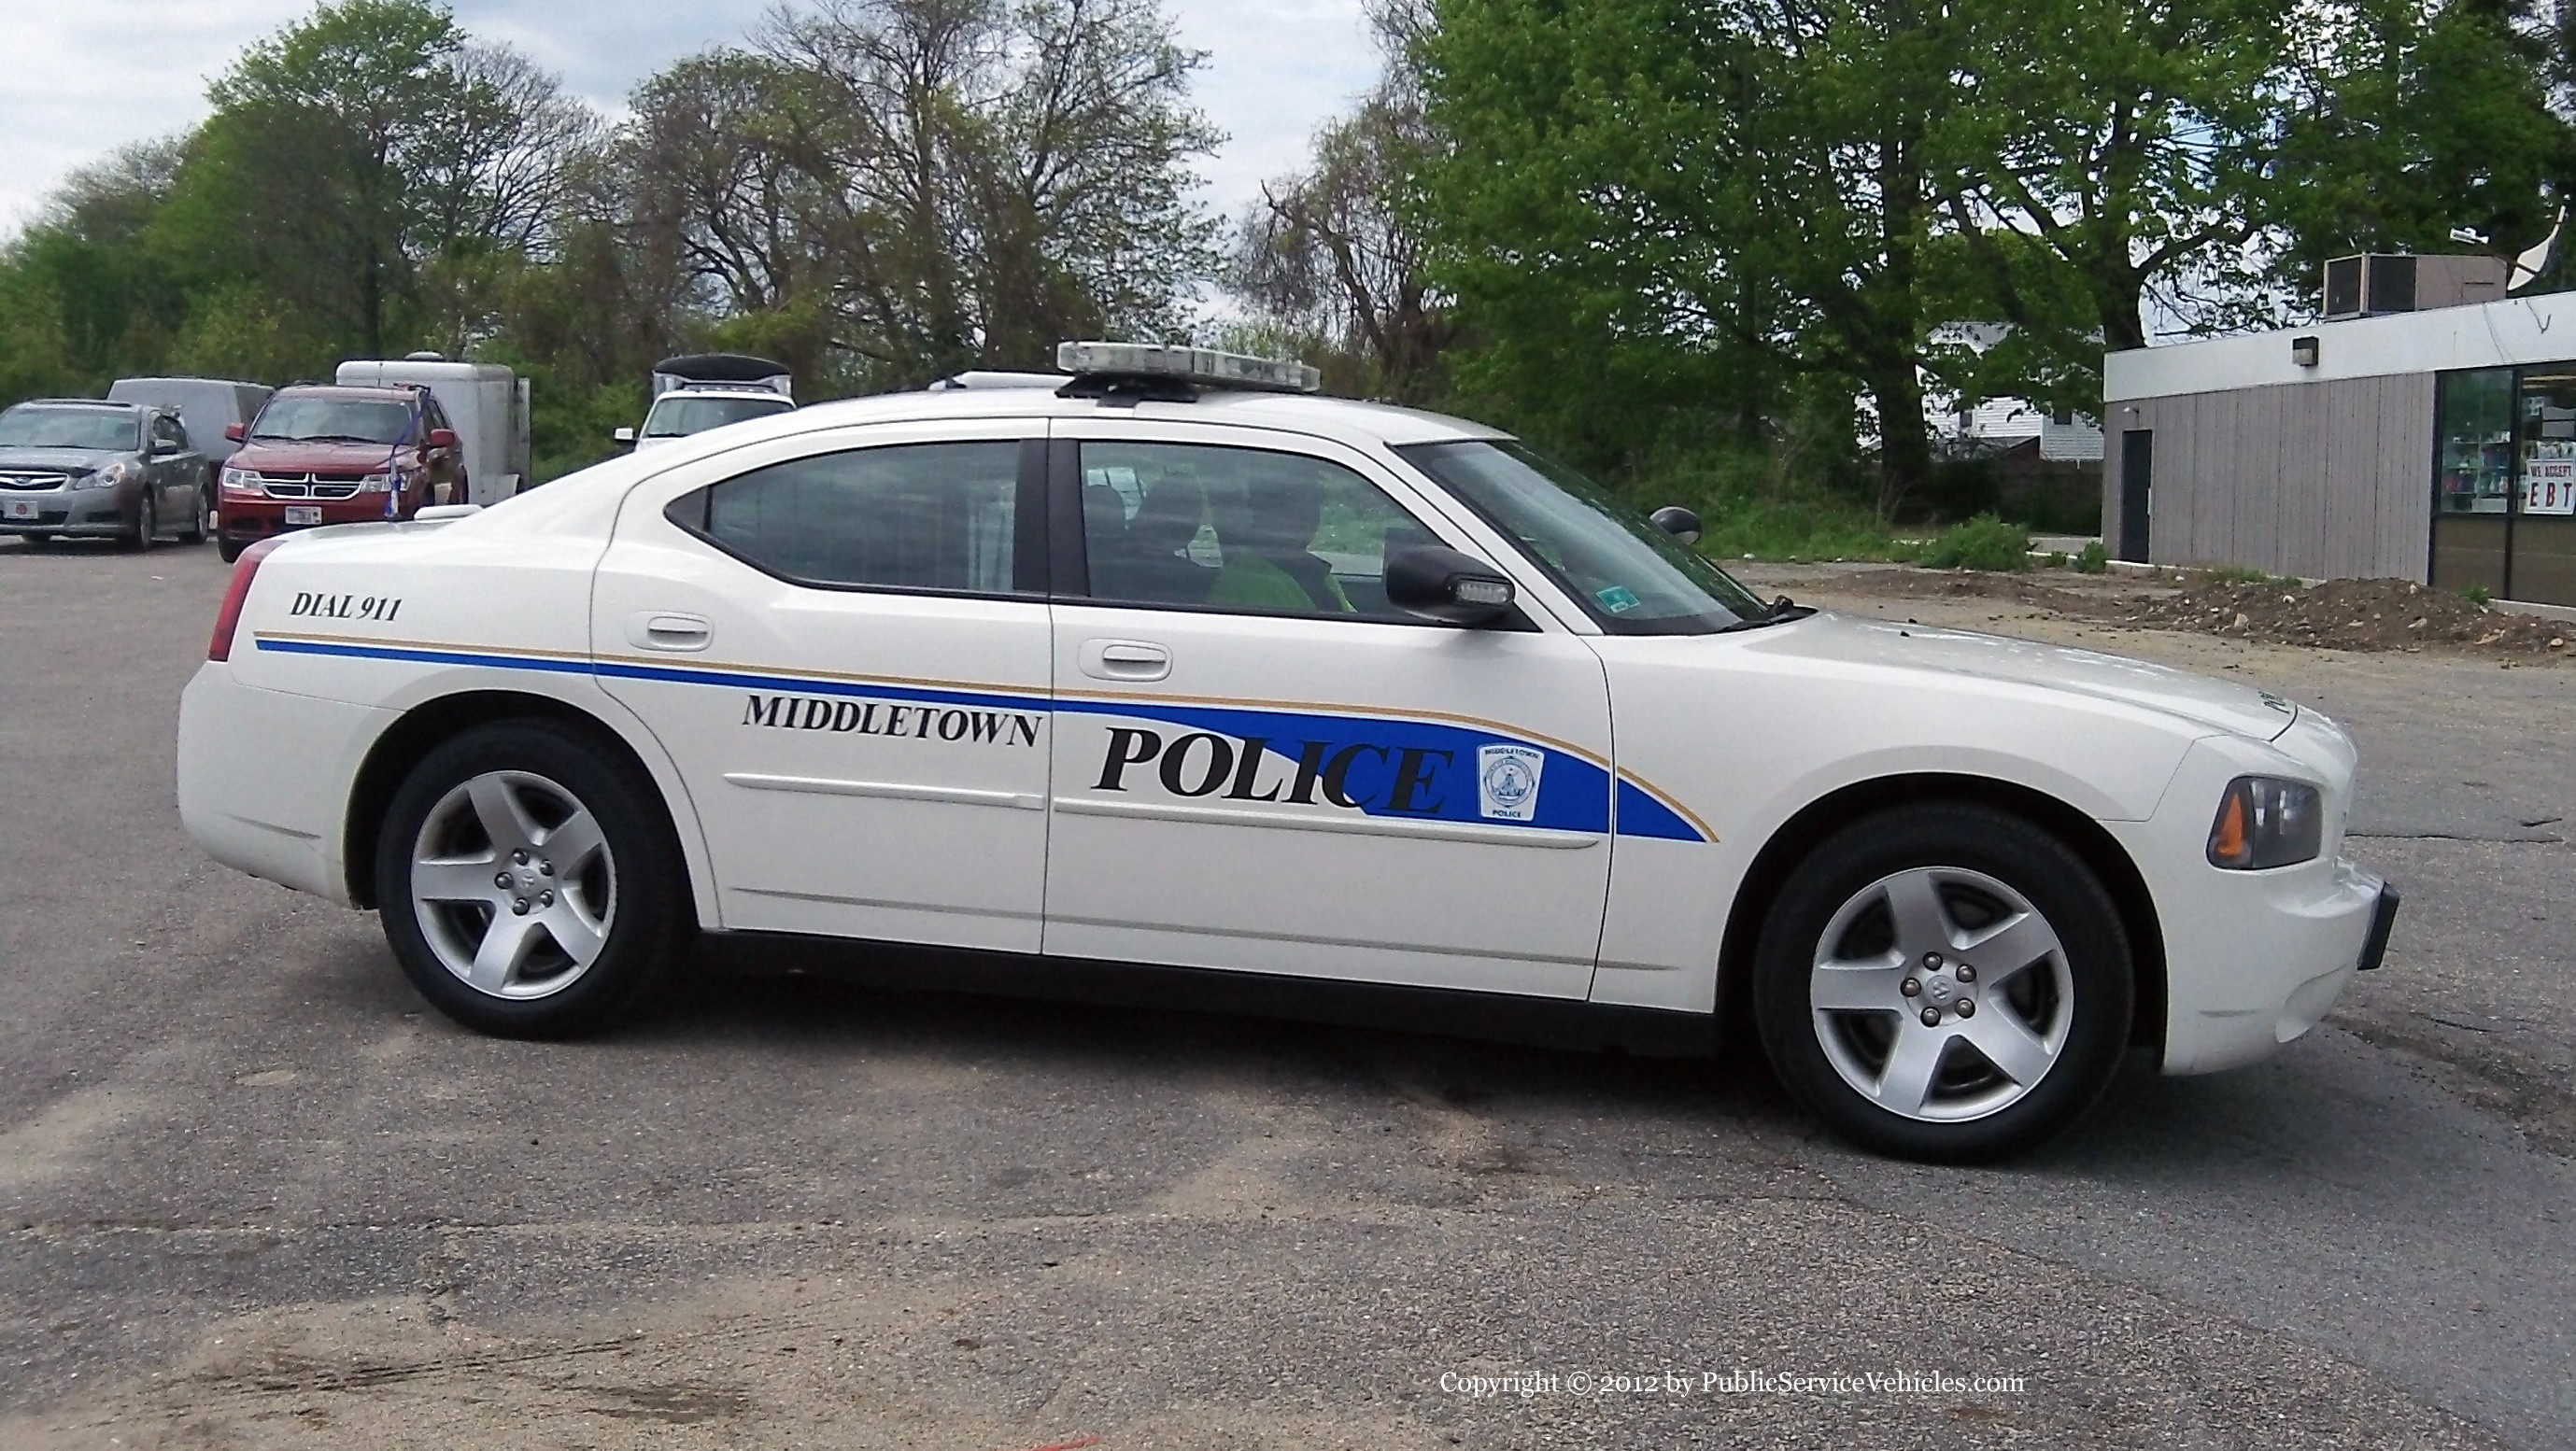 A photo  of Middletown Police
            Cruiser 2028, a 2006-2010 Dodge Charger             taken by Kieran Egan